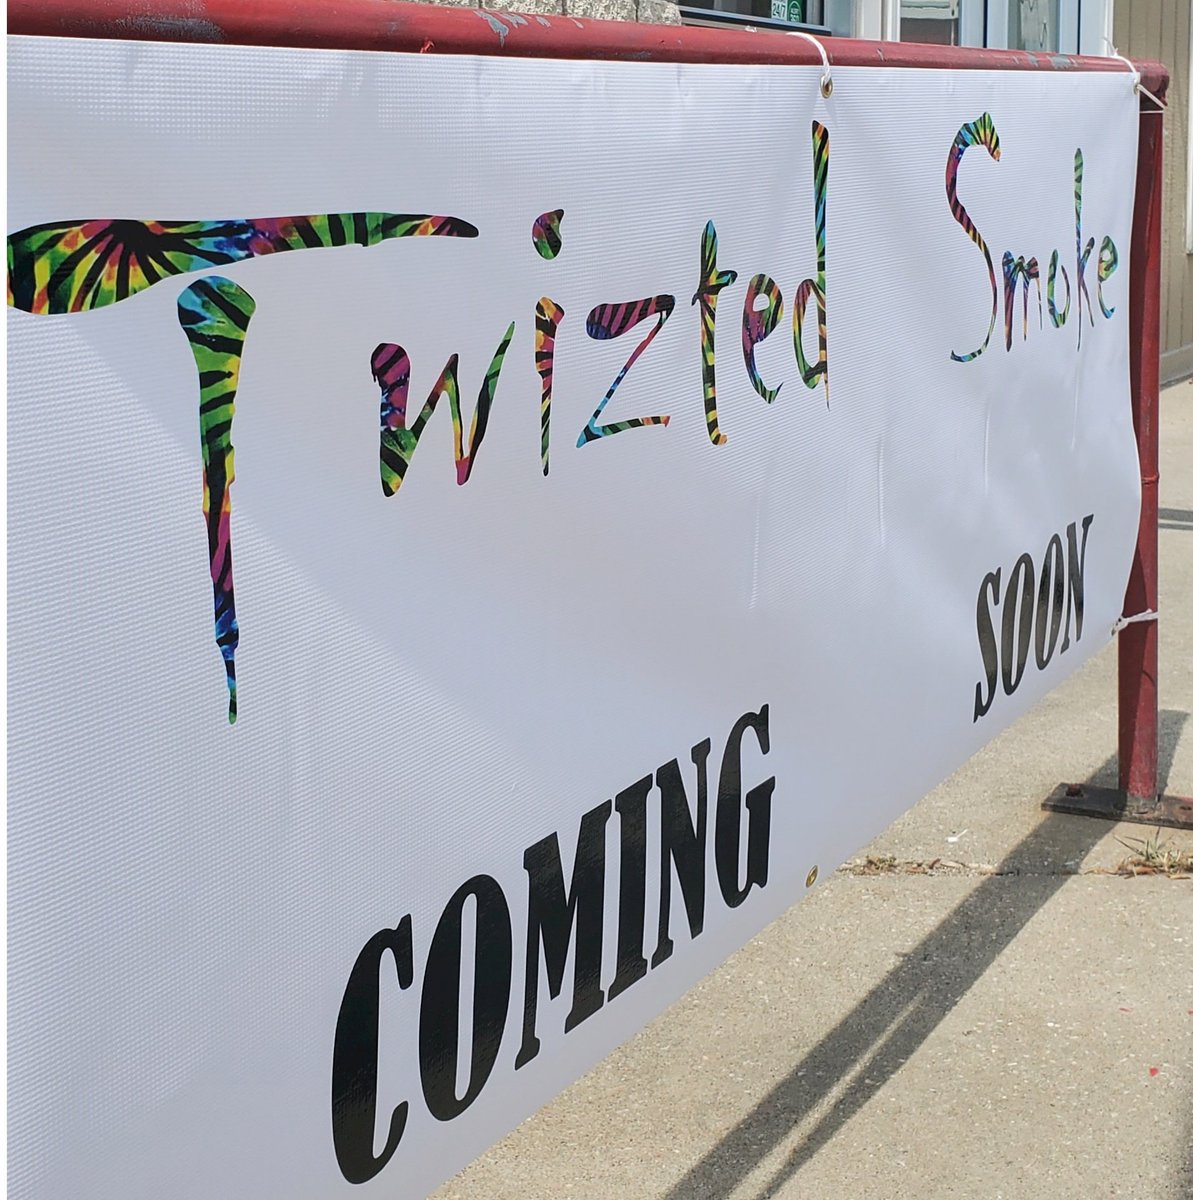 Twizted Smoke COMING SOON to Rhome Texas.
Things are progressing very well and our Grand Opening is on schedule! Stay turned for upcoming events!

#vape #vapecommunity #vaper #vapejuice #vapelife #vapetexas #Twiztedsmoke